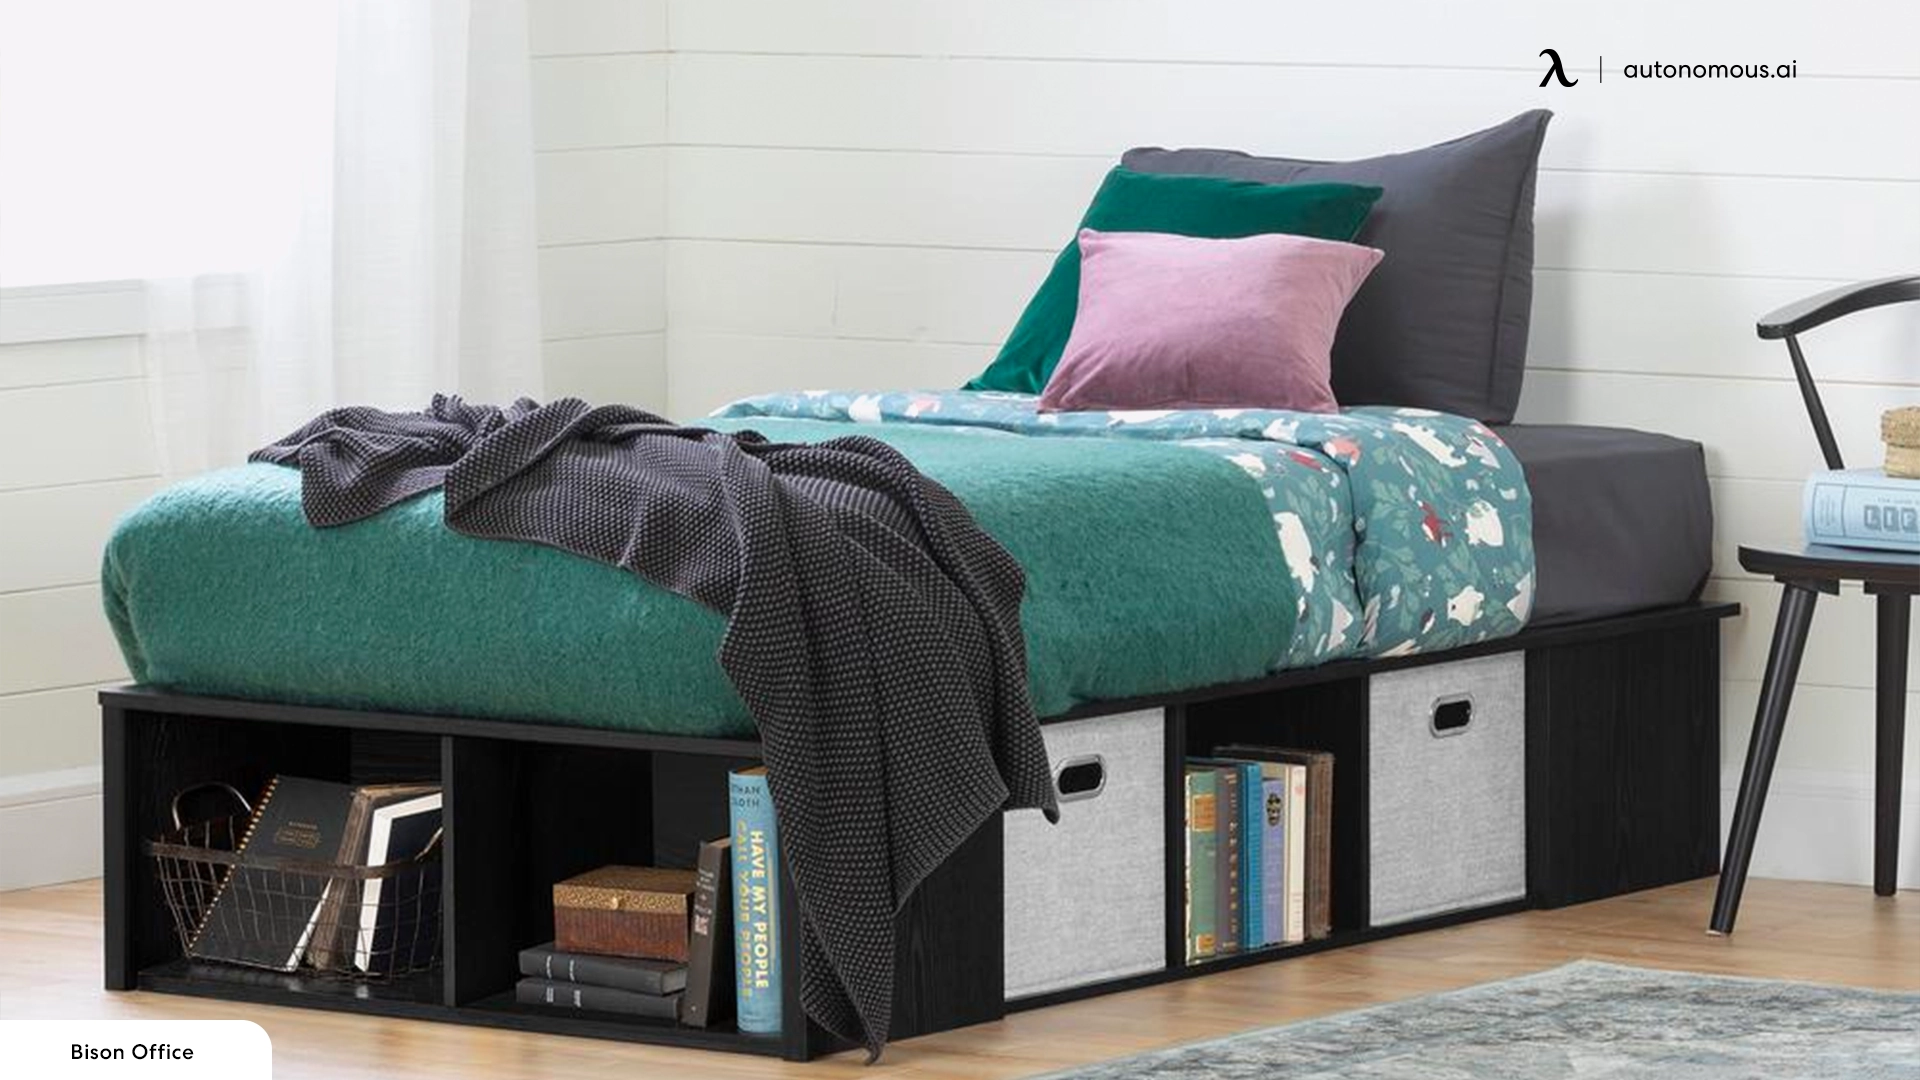 Under-Bed Storage You Can Also Use as a Table